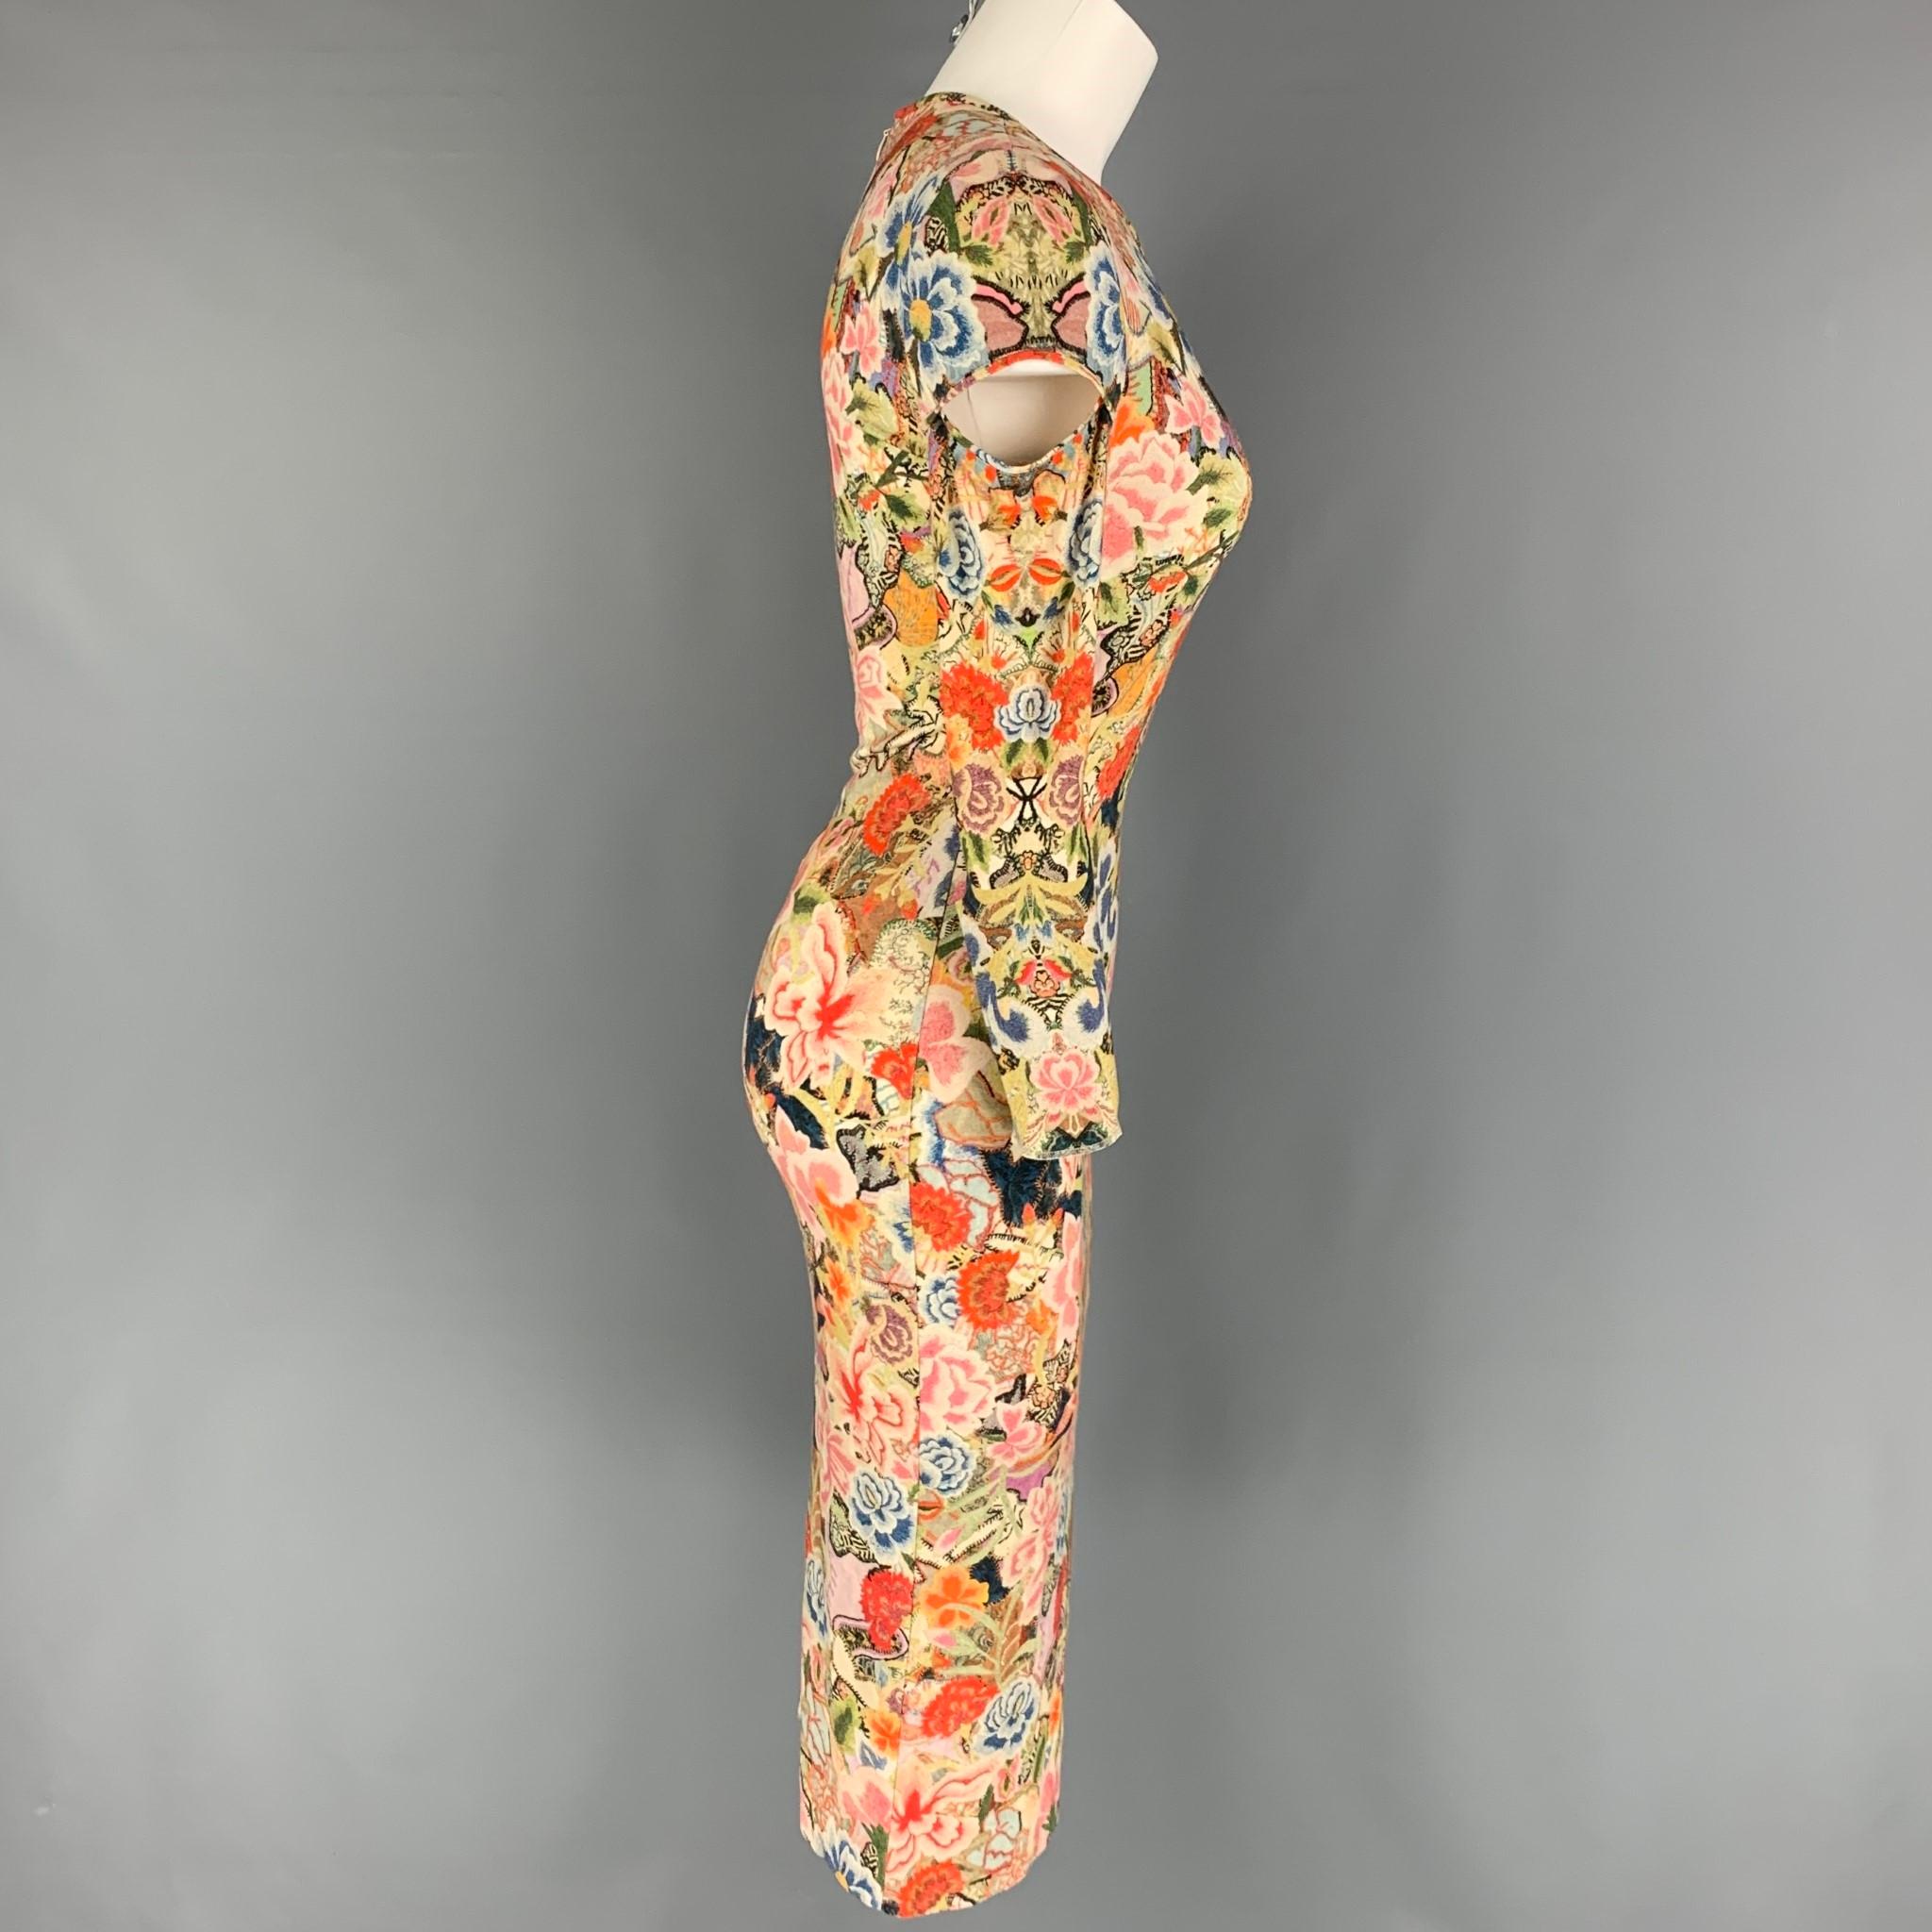 ALEXANDER McQUEEN dress comes in a multi-color abstract floral rayon blend featuring shoulder cut-out details, crew-neck, and a back zip up closure. Made in Italy.

Very Good Pre-Owned Condition.
Marked: 40

Measurements:

Shoulder: 15 in.
Bust: 30